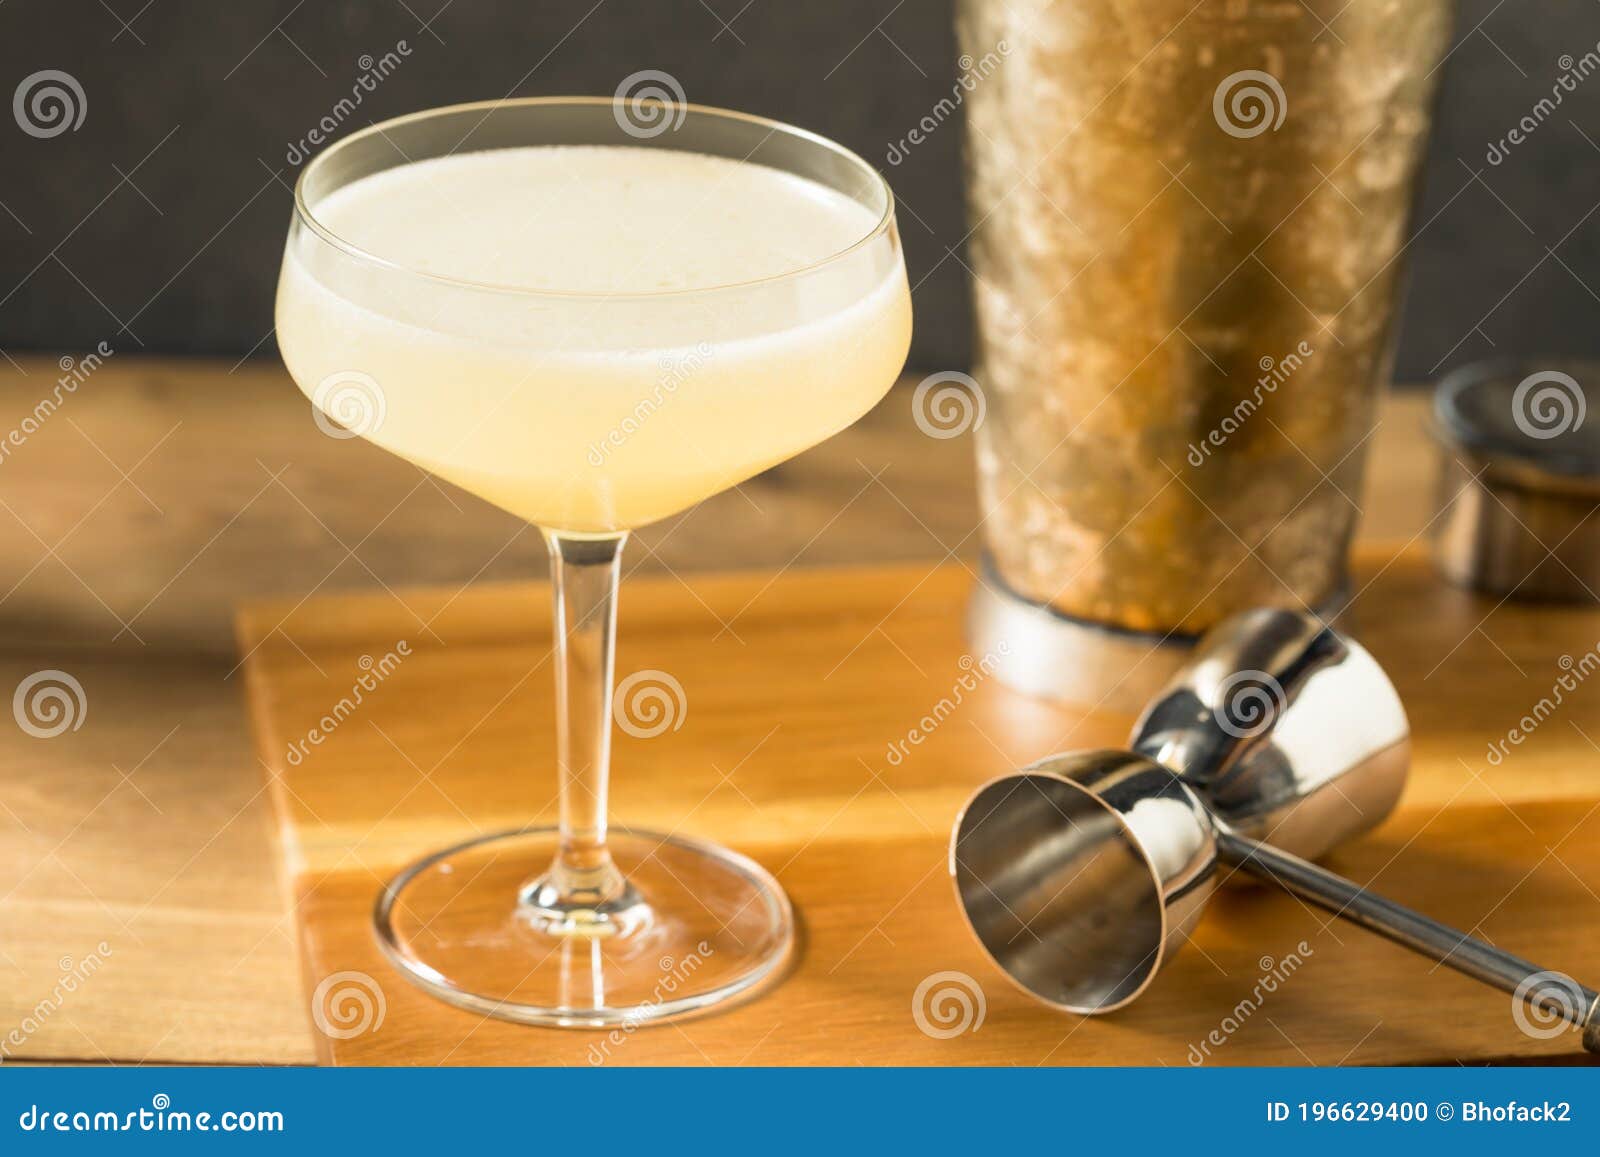 boozy corpse reviver no 2 cocktail